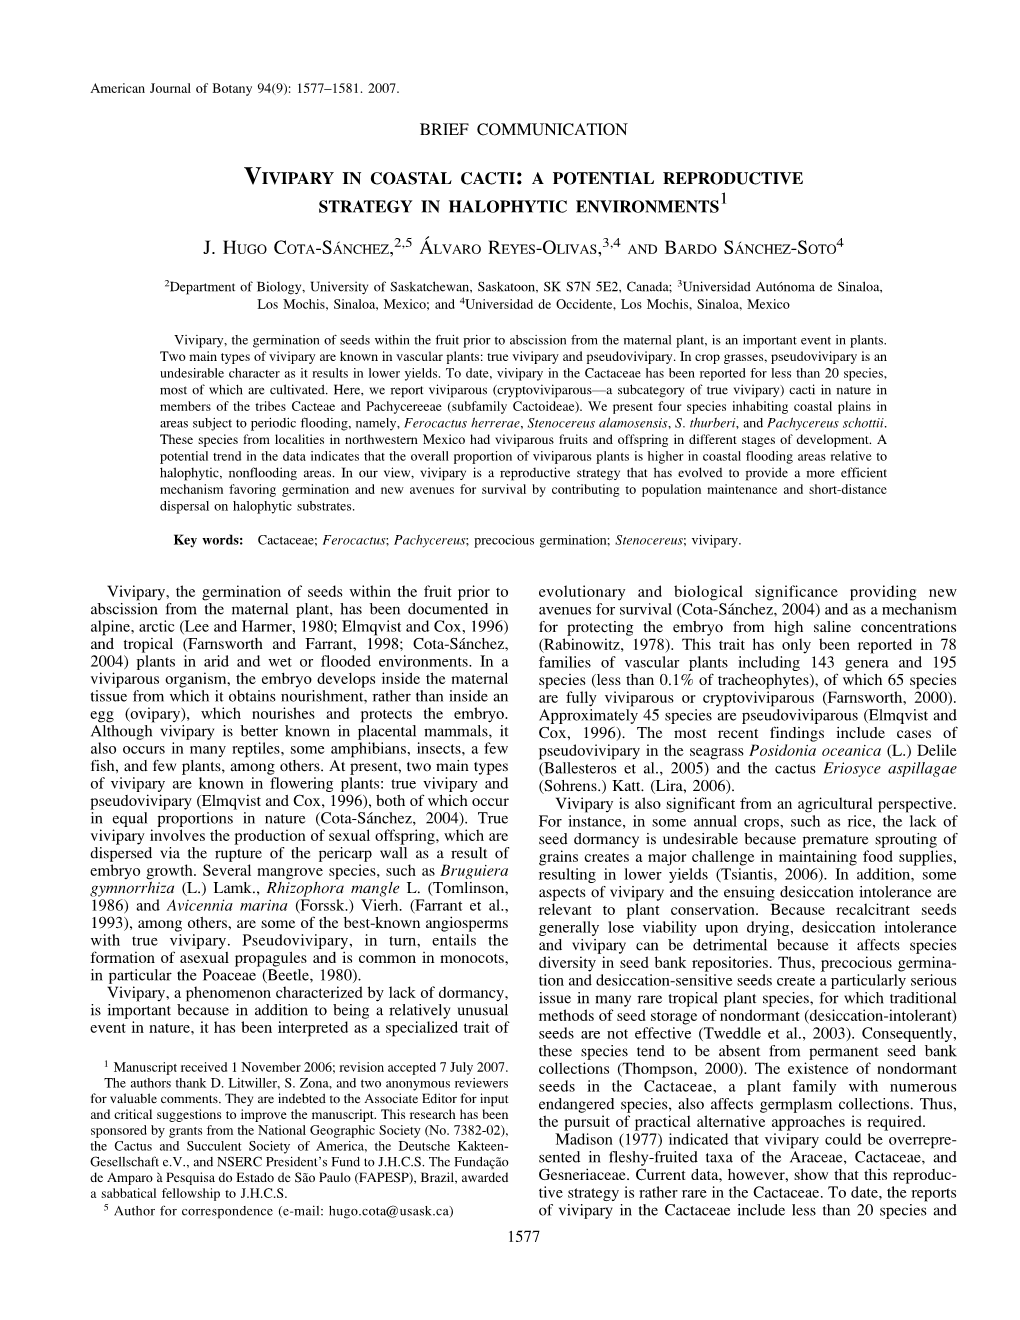 Brief Communication Vivipary in Coastal Cacti: a Potential